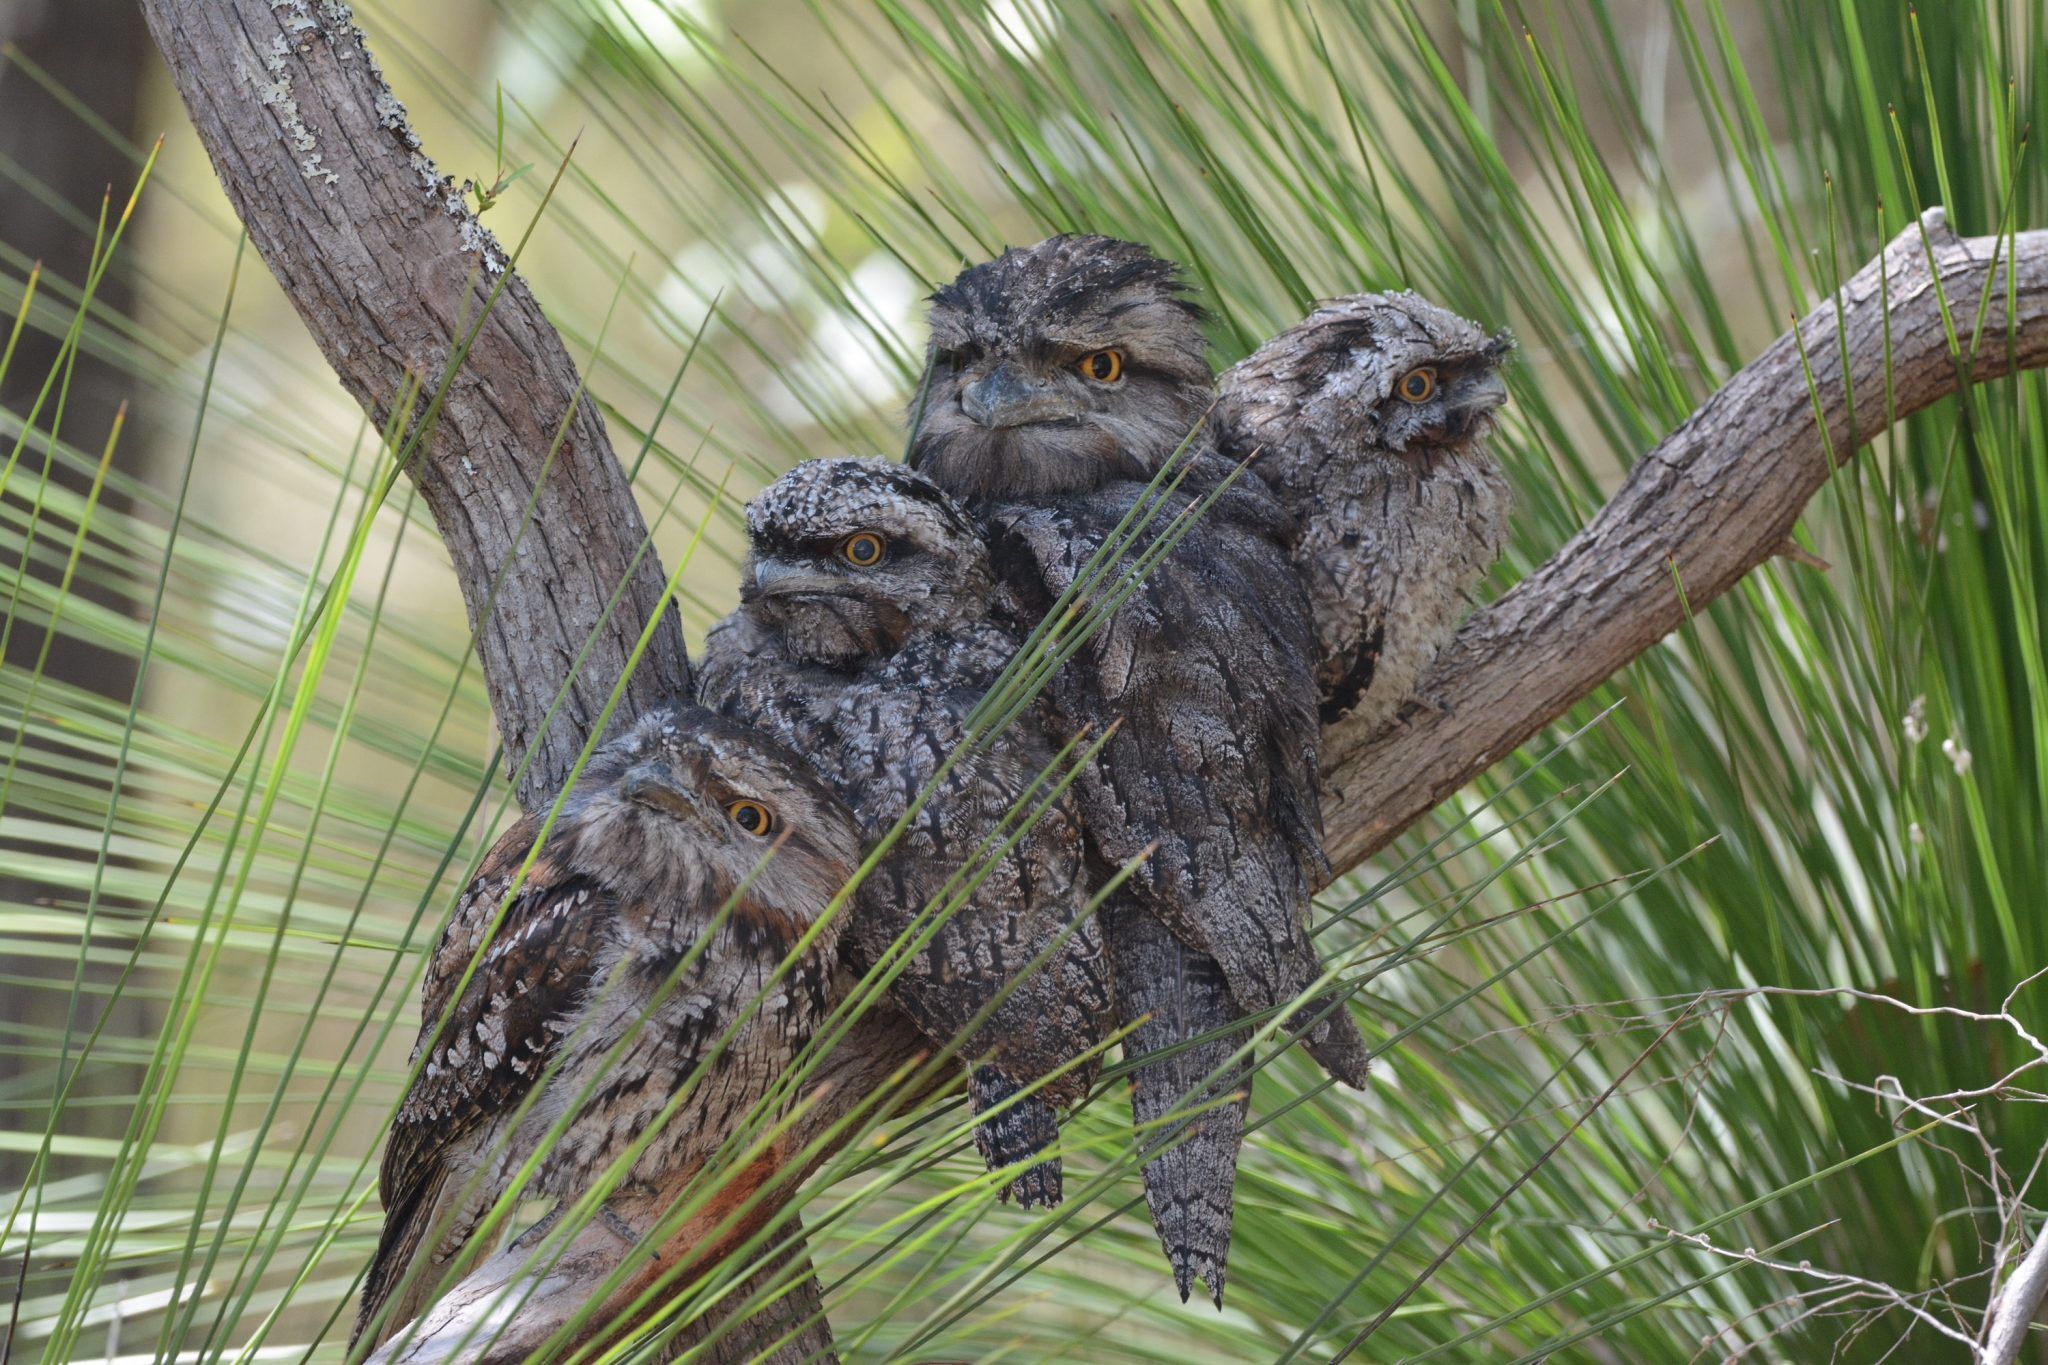 Birdwatching in the Margaret River Tawny Frogmouths